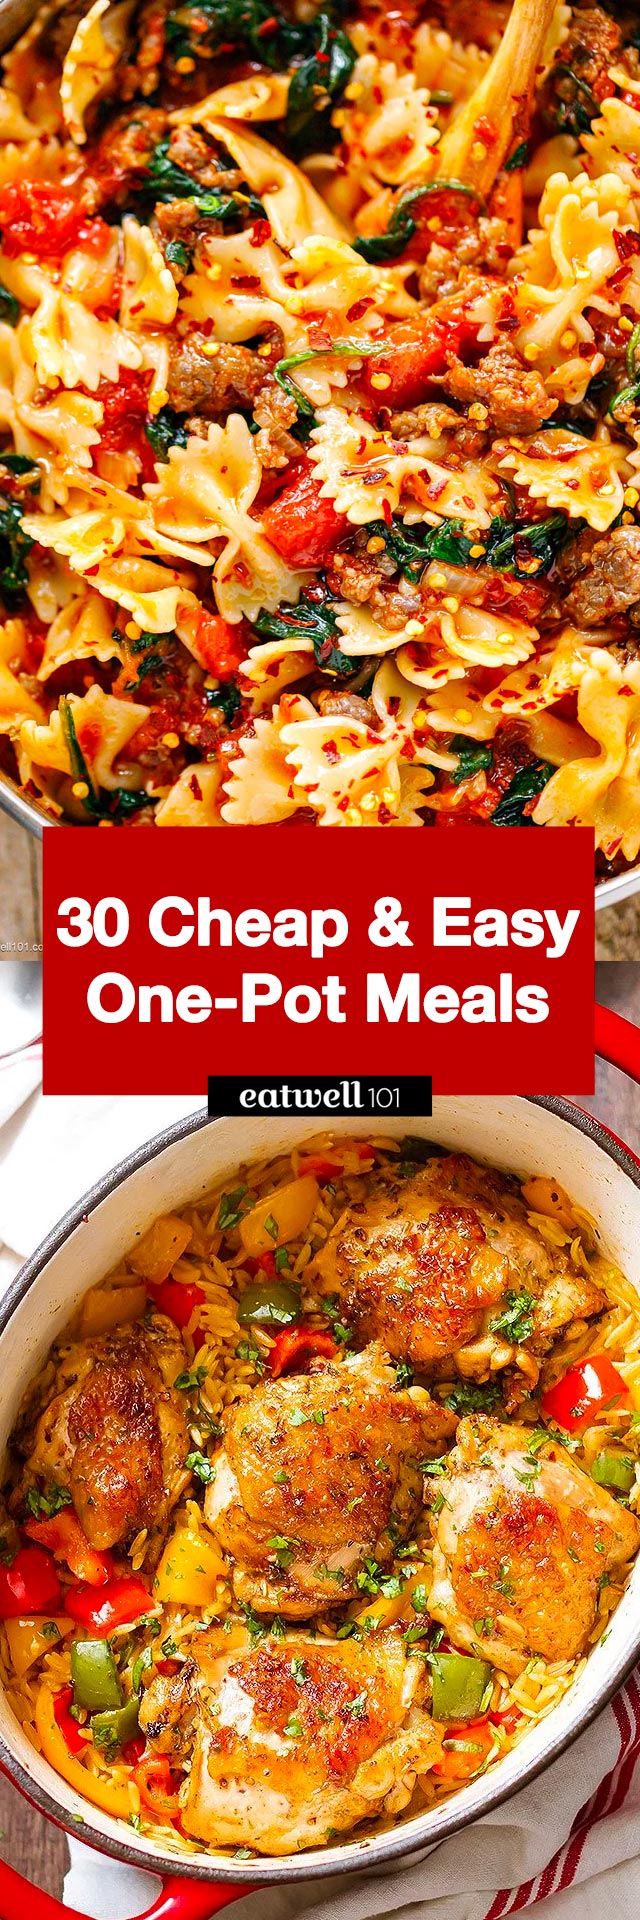 One Pot Meal Recipes 1 